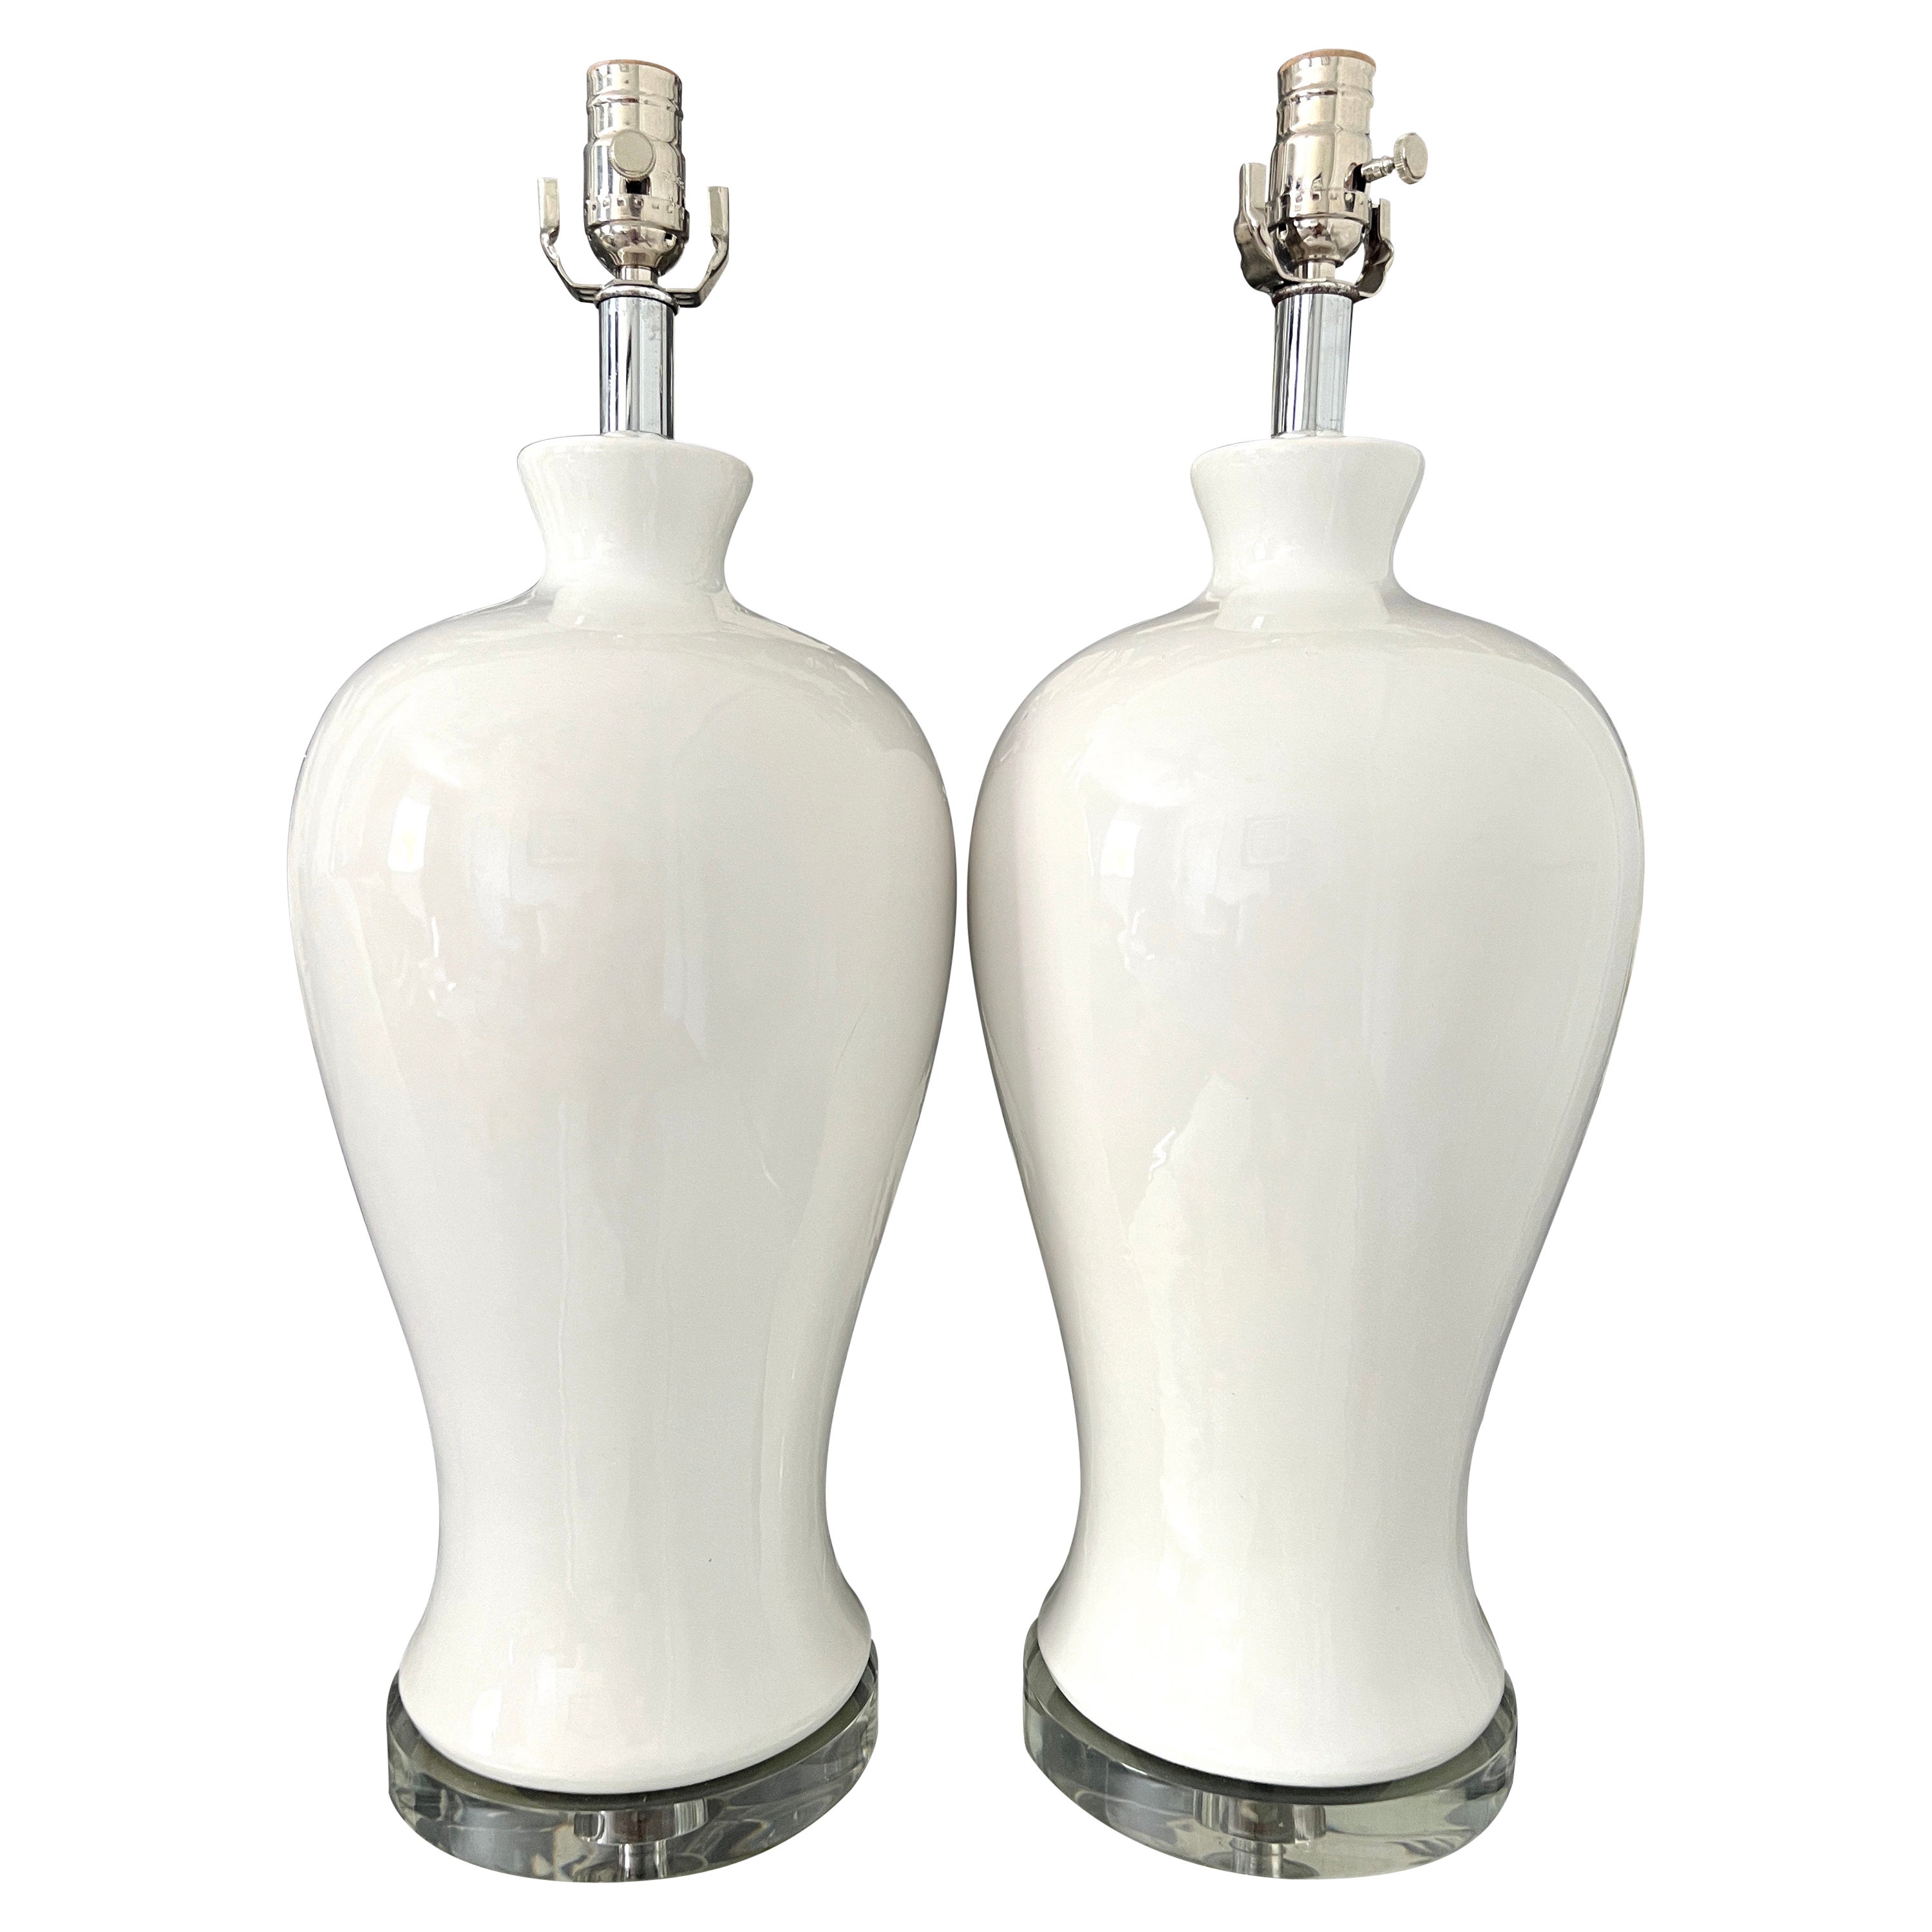 Pair of Modernist Ceramic Urn Lamps in White Glaze with Lucite Bases, c. 1960's